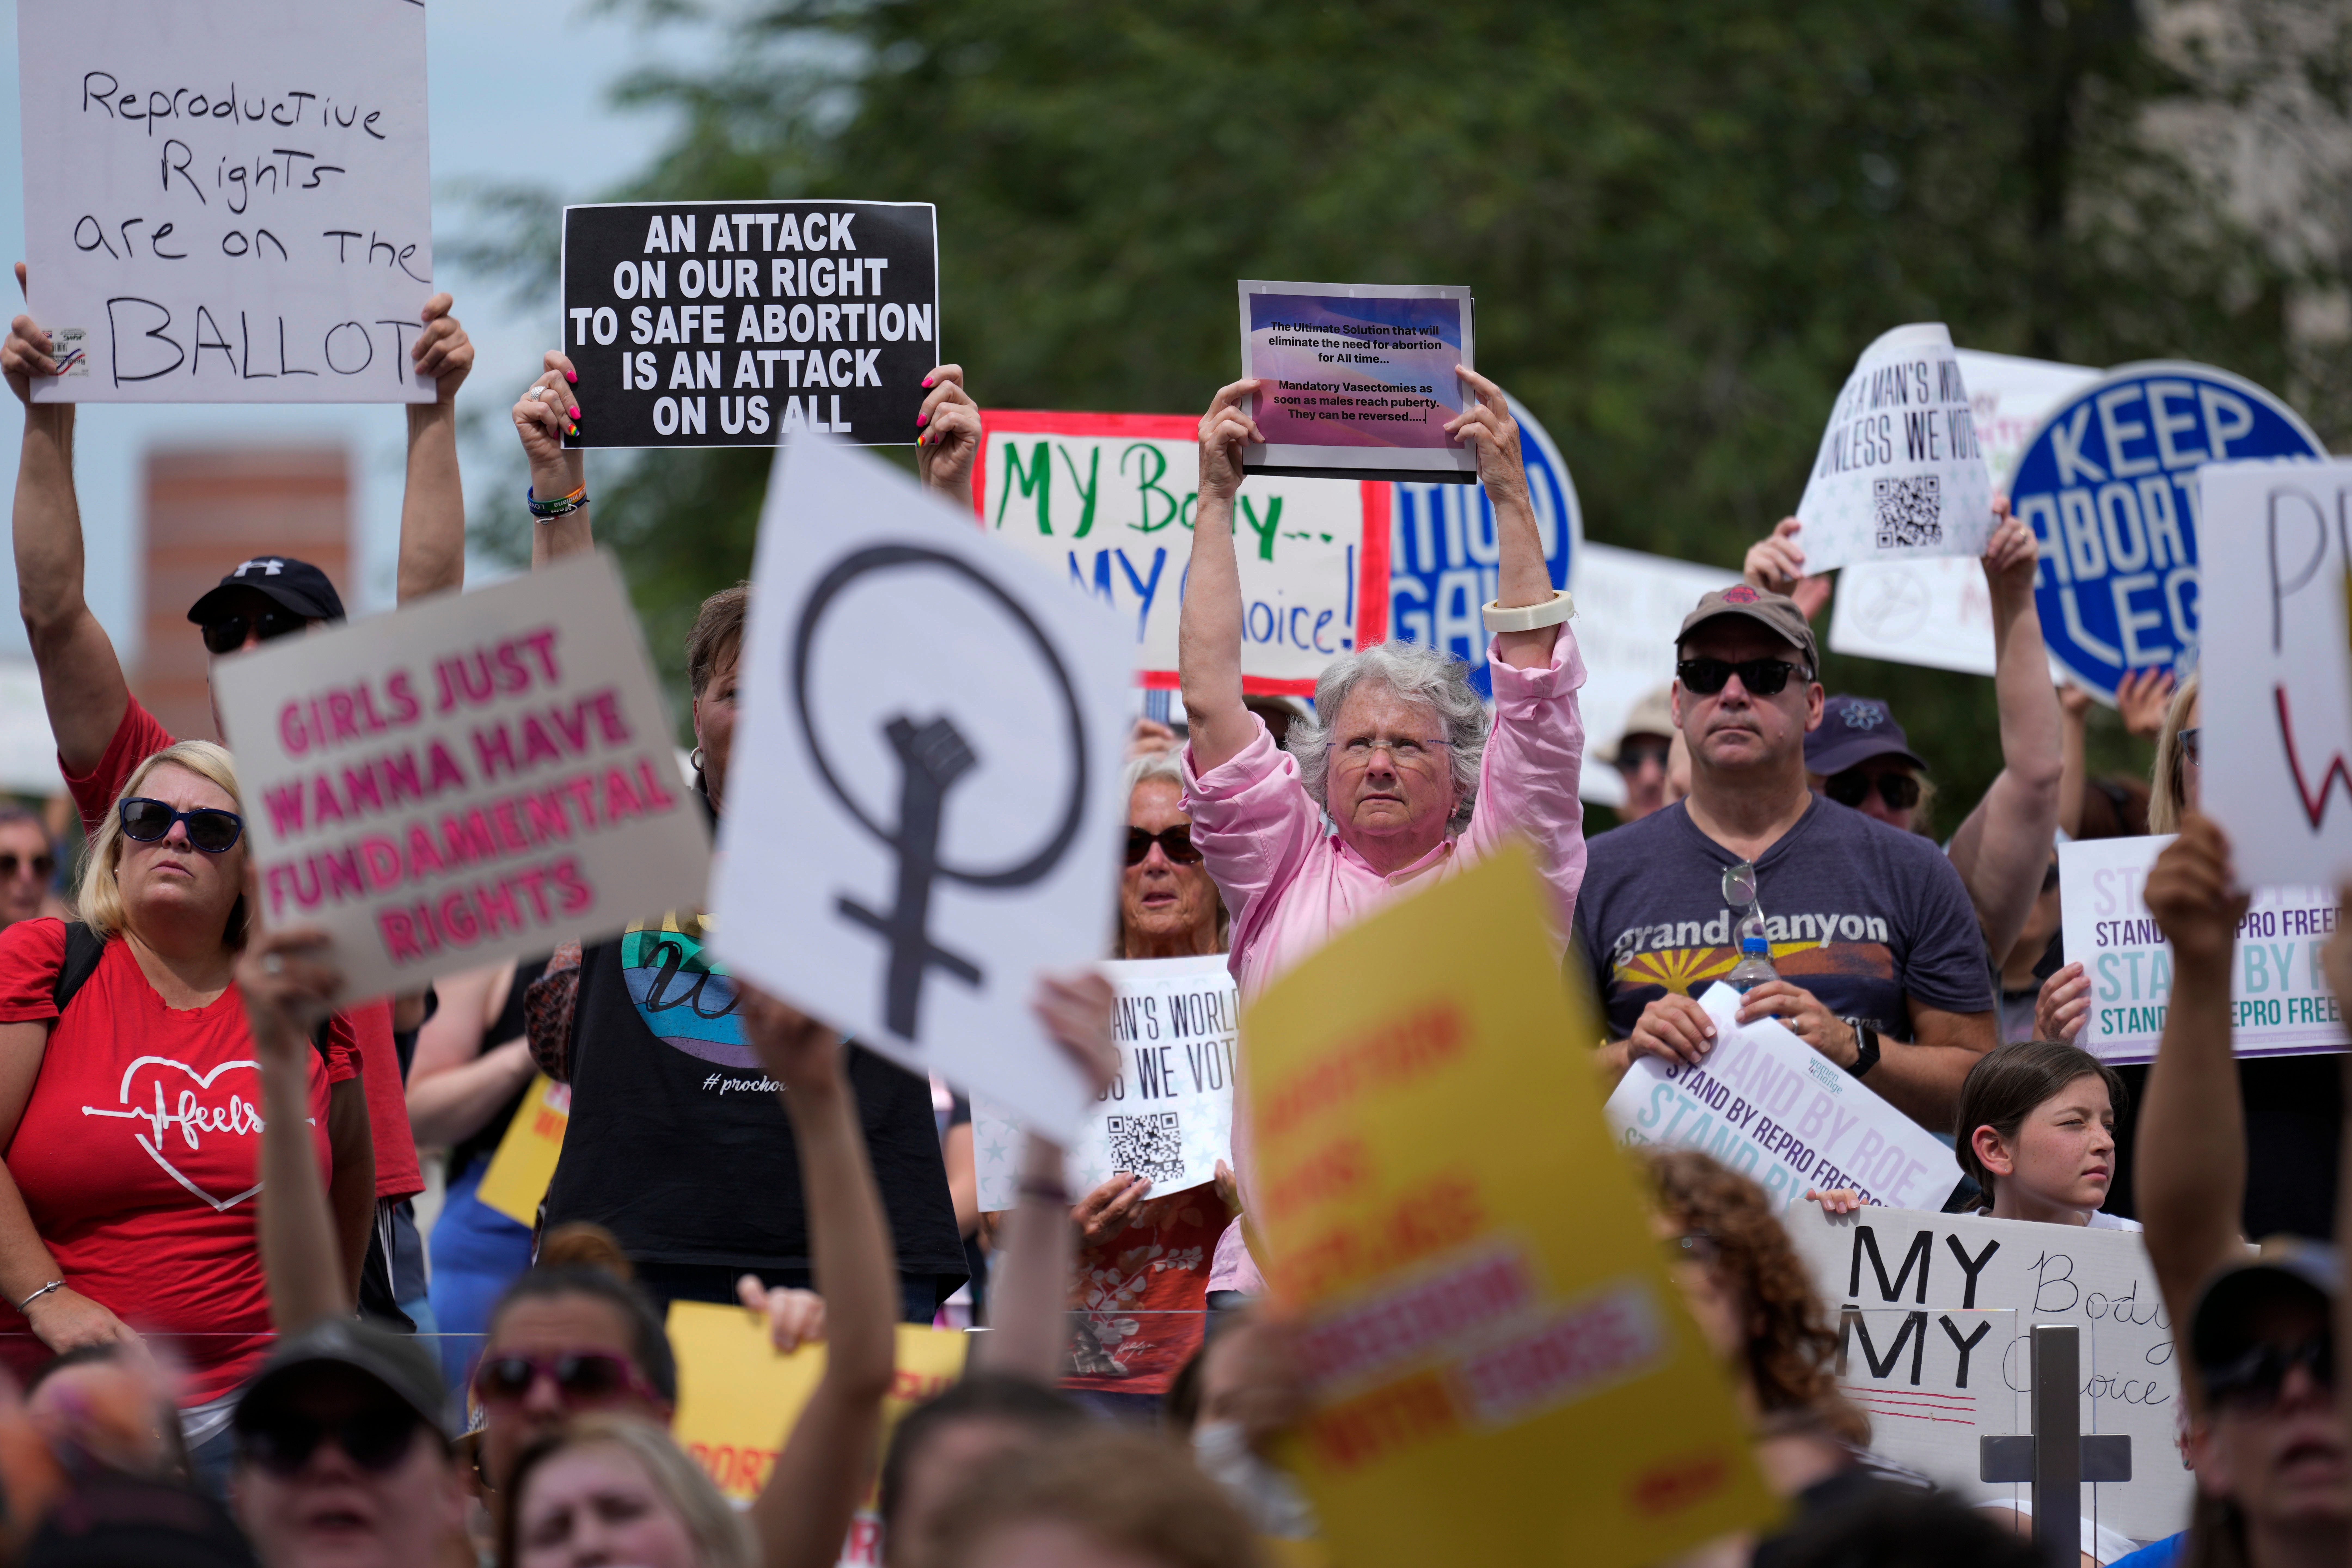 Abortion rights demonstrators protested outside the Indiana statehouse on 25 June following the US Supreme Court’s decision to strike down constitutional protections for abortion care.